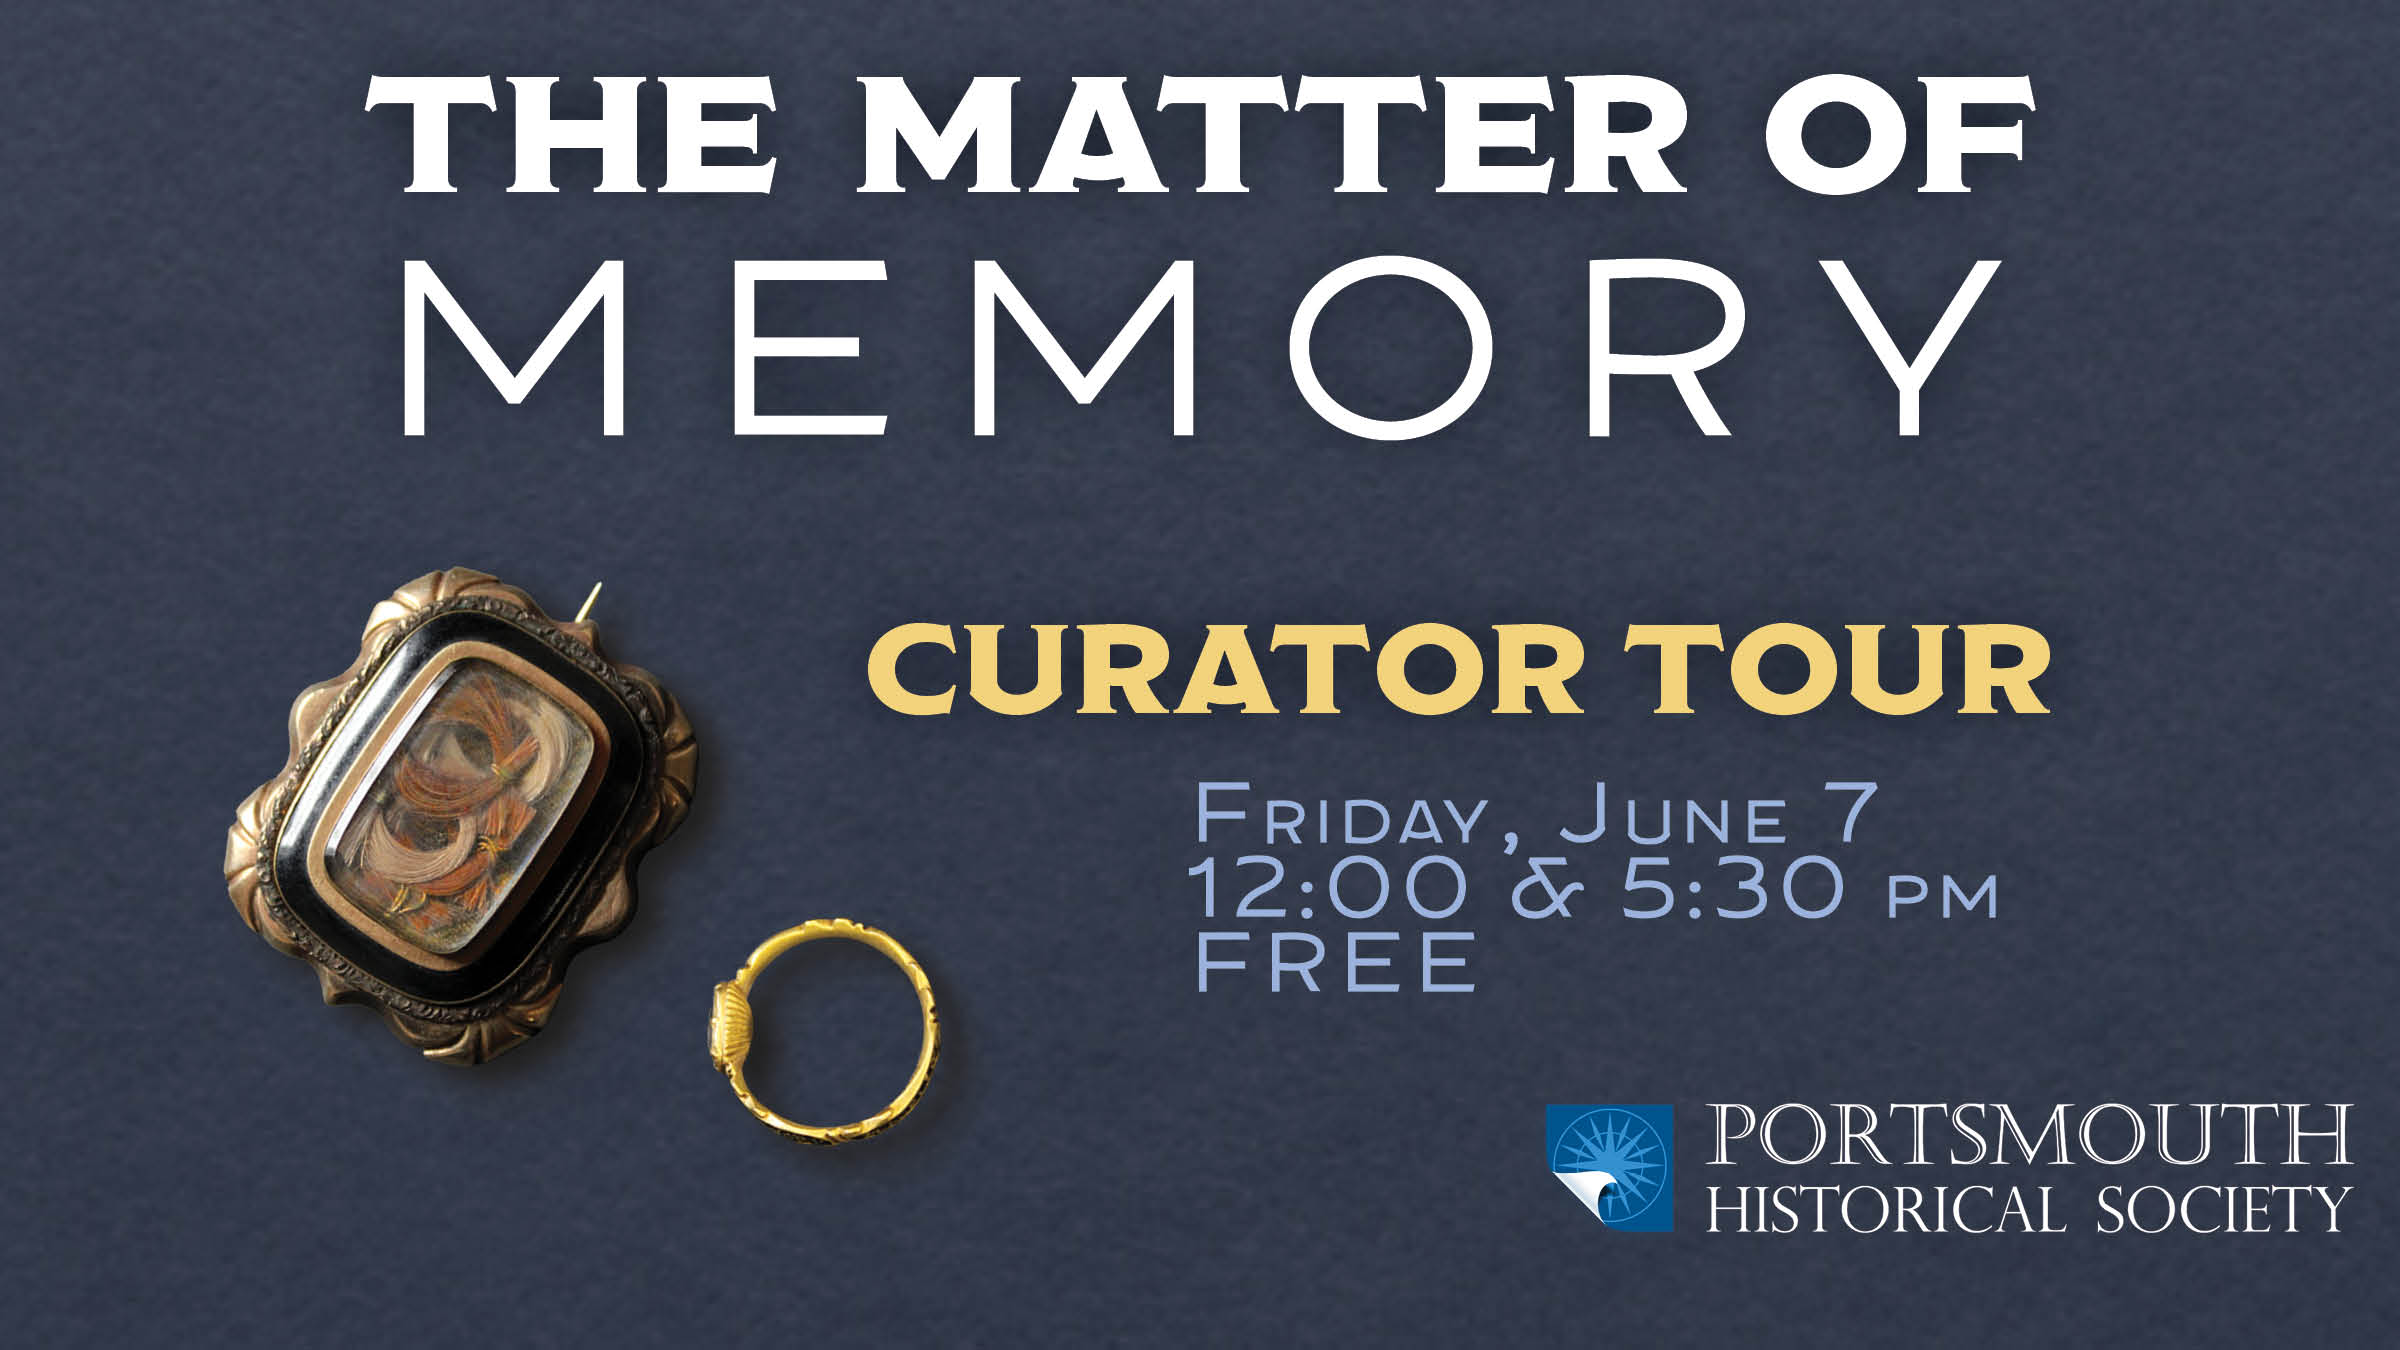 The Matter of Memory Curator Tour. Every first Friday at noon and 5:30 pm. Free.